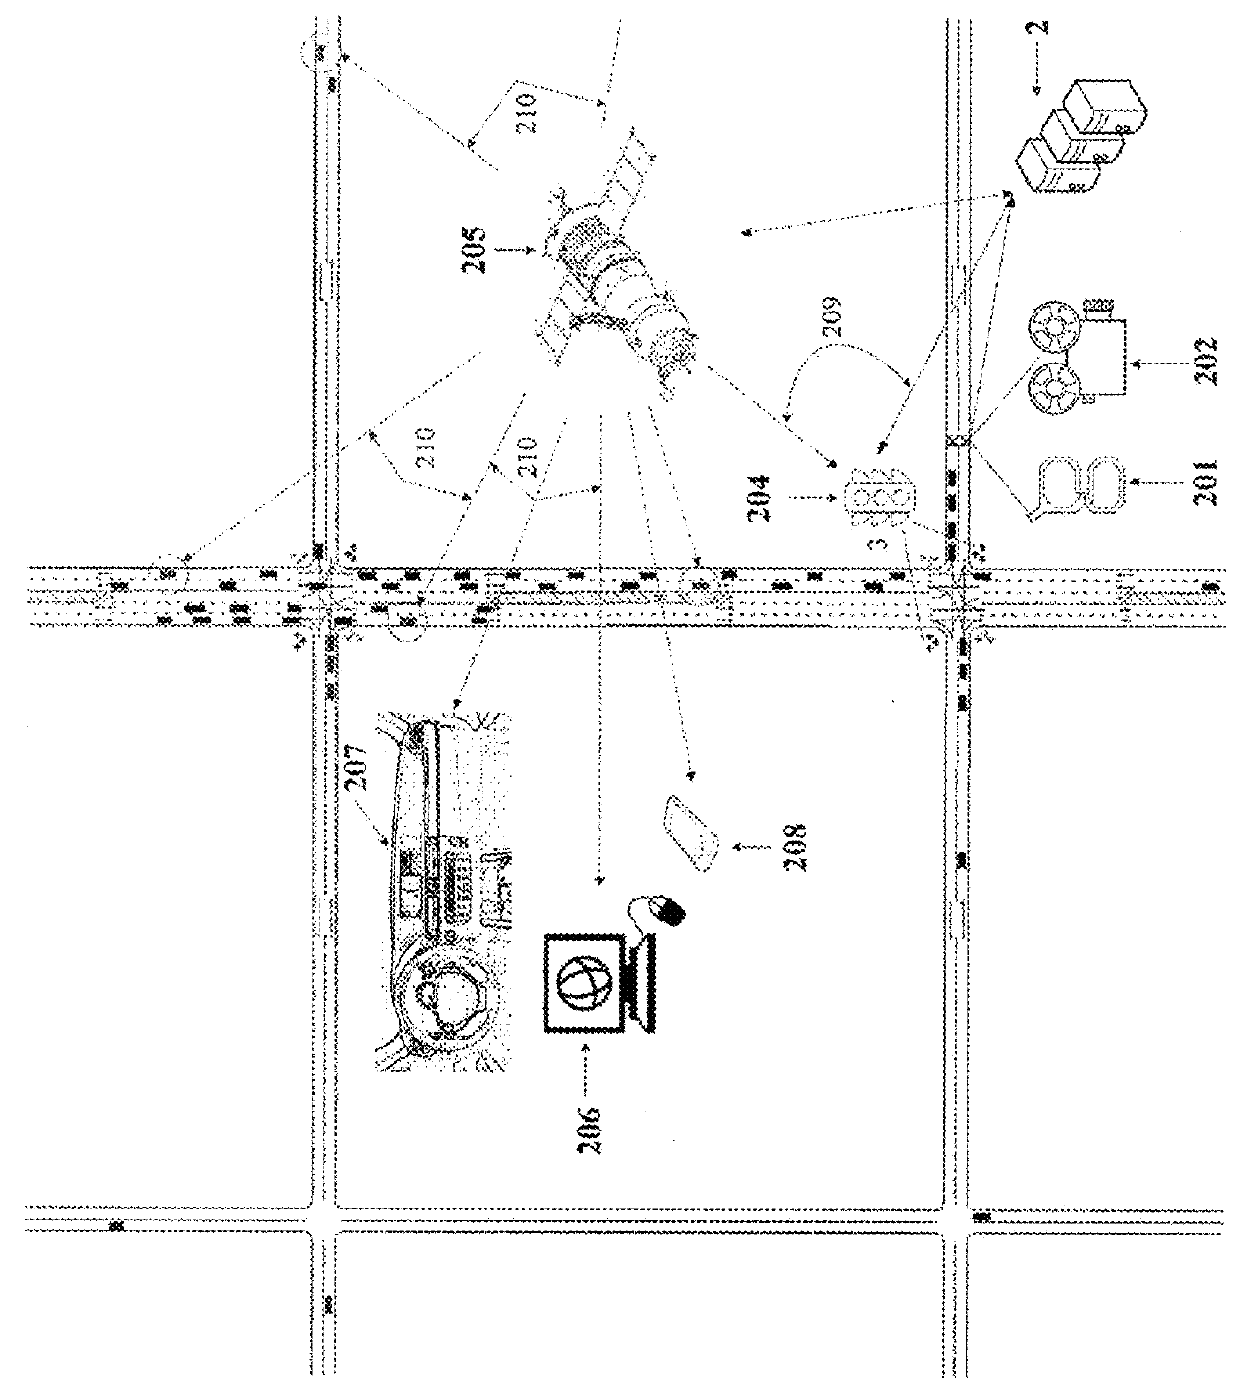 Lane-level vehicle navigation for vehicle routing and traffic management